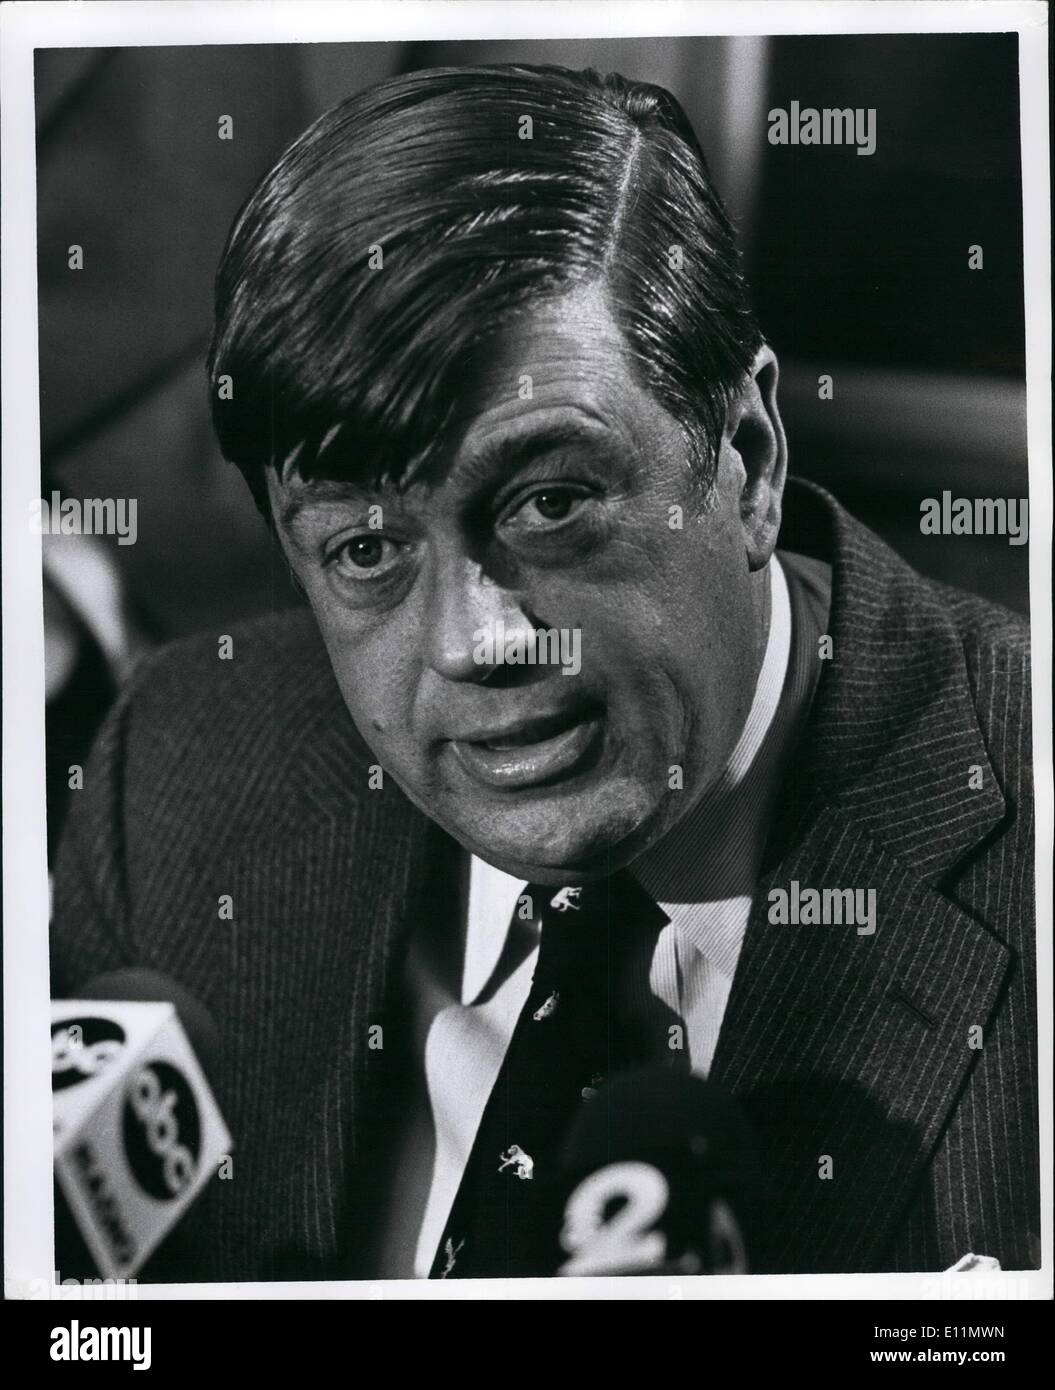 Mar. 03, 1979 - Wed. March 21, 1979-New York City:Independent special councel to the justice Dept. Paul J. Curran held a news conference this morning in the New York offices of his law firm, Kaye, Scholer, Fierman, Hays, and Handler. Mr. Curran was appointed yesterday to conduct ''The remainder of the inquiry into various loan transactions between the national bank of Georgia and the Carter Warehouse. Mr. Curran is 46 years old and a former United States Attorney. Stock Photo